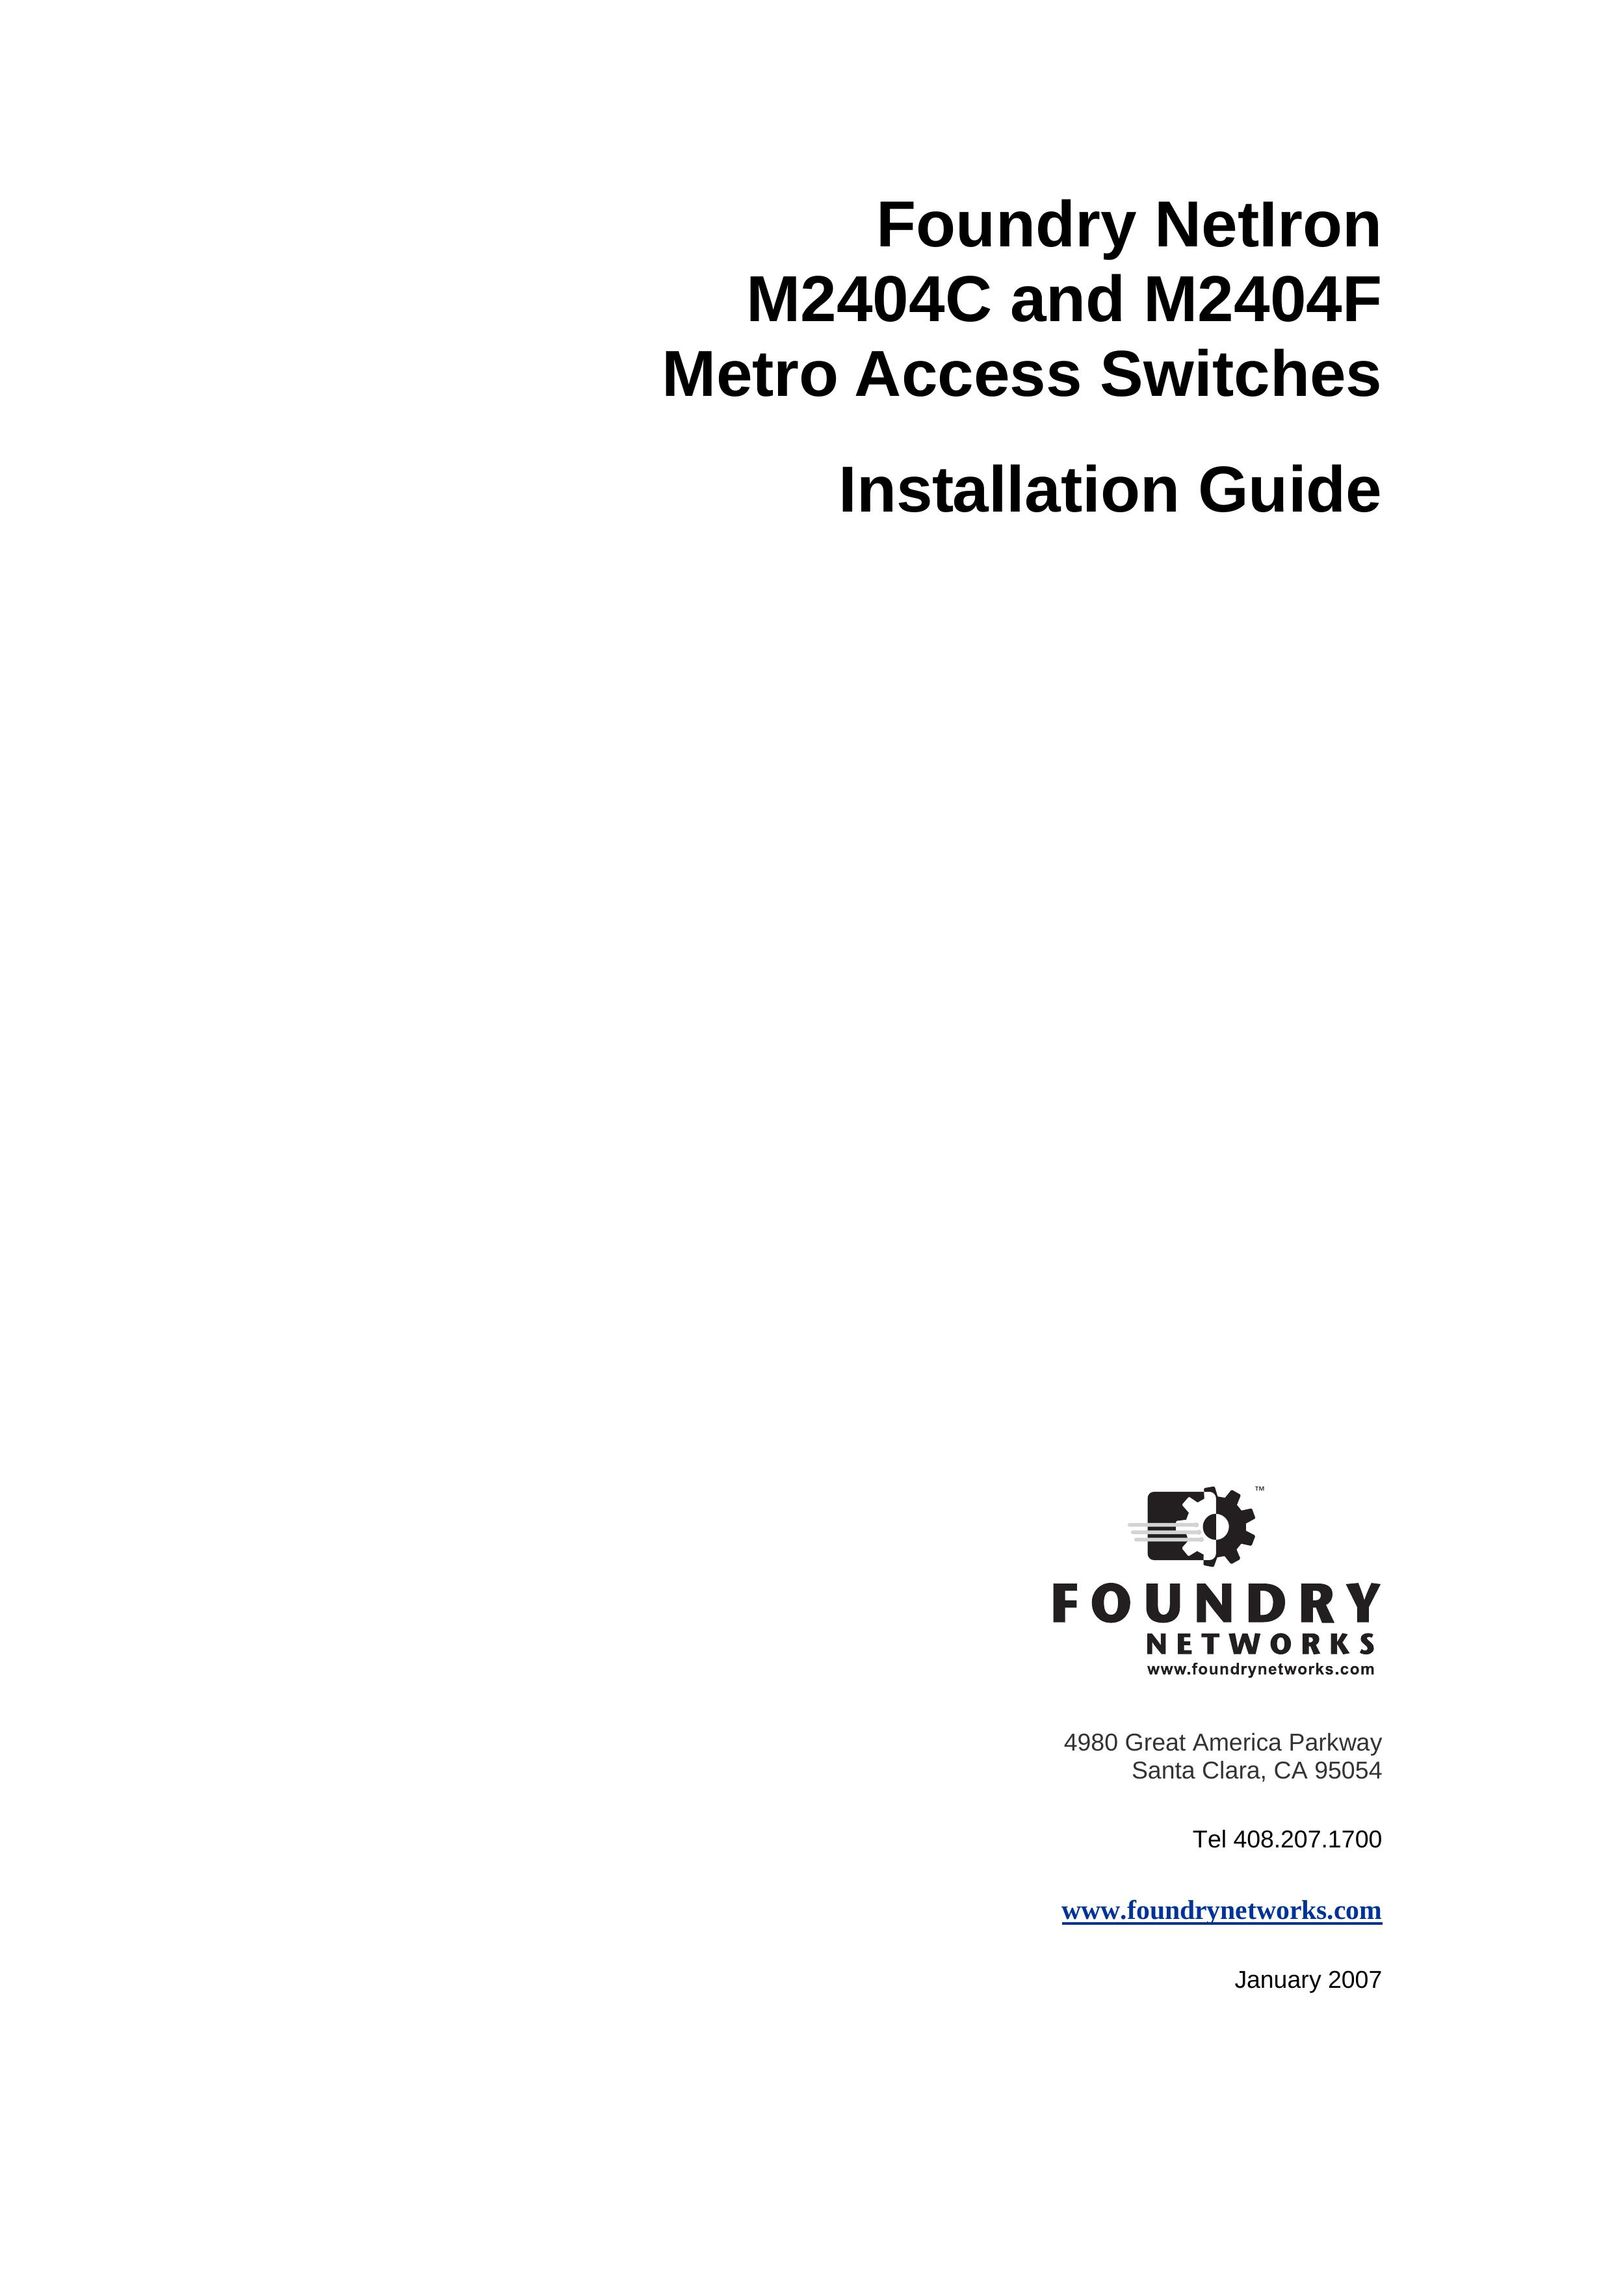 Foundry Networks M2404C Switch User Manual